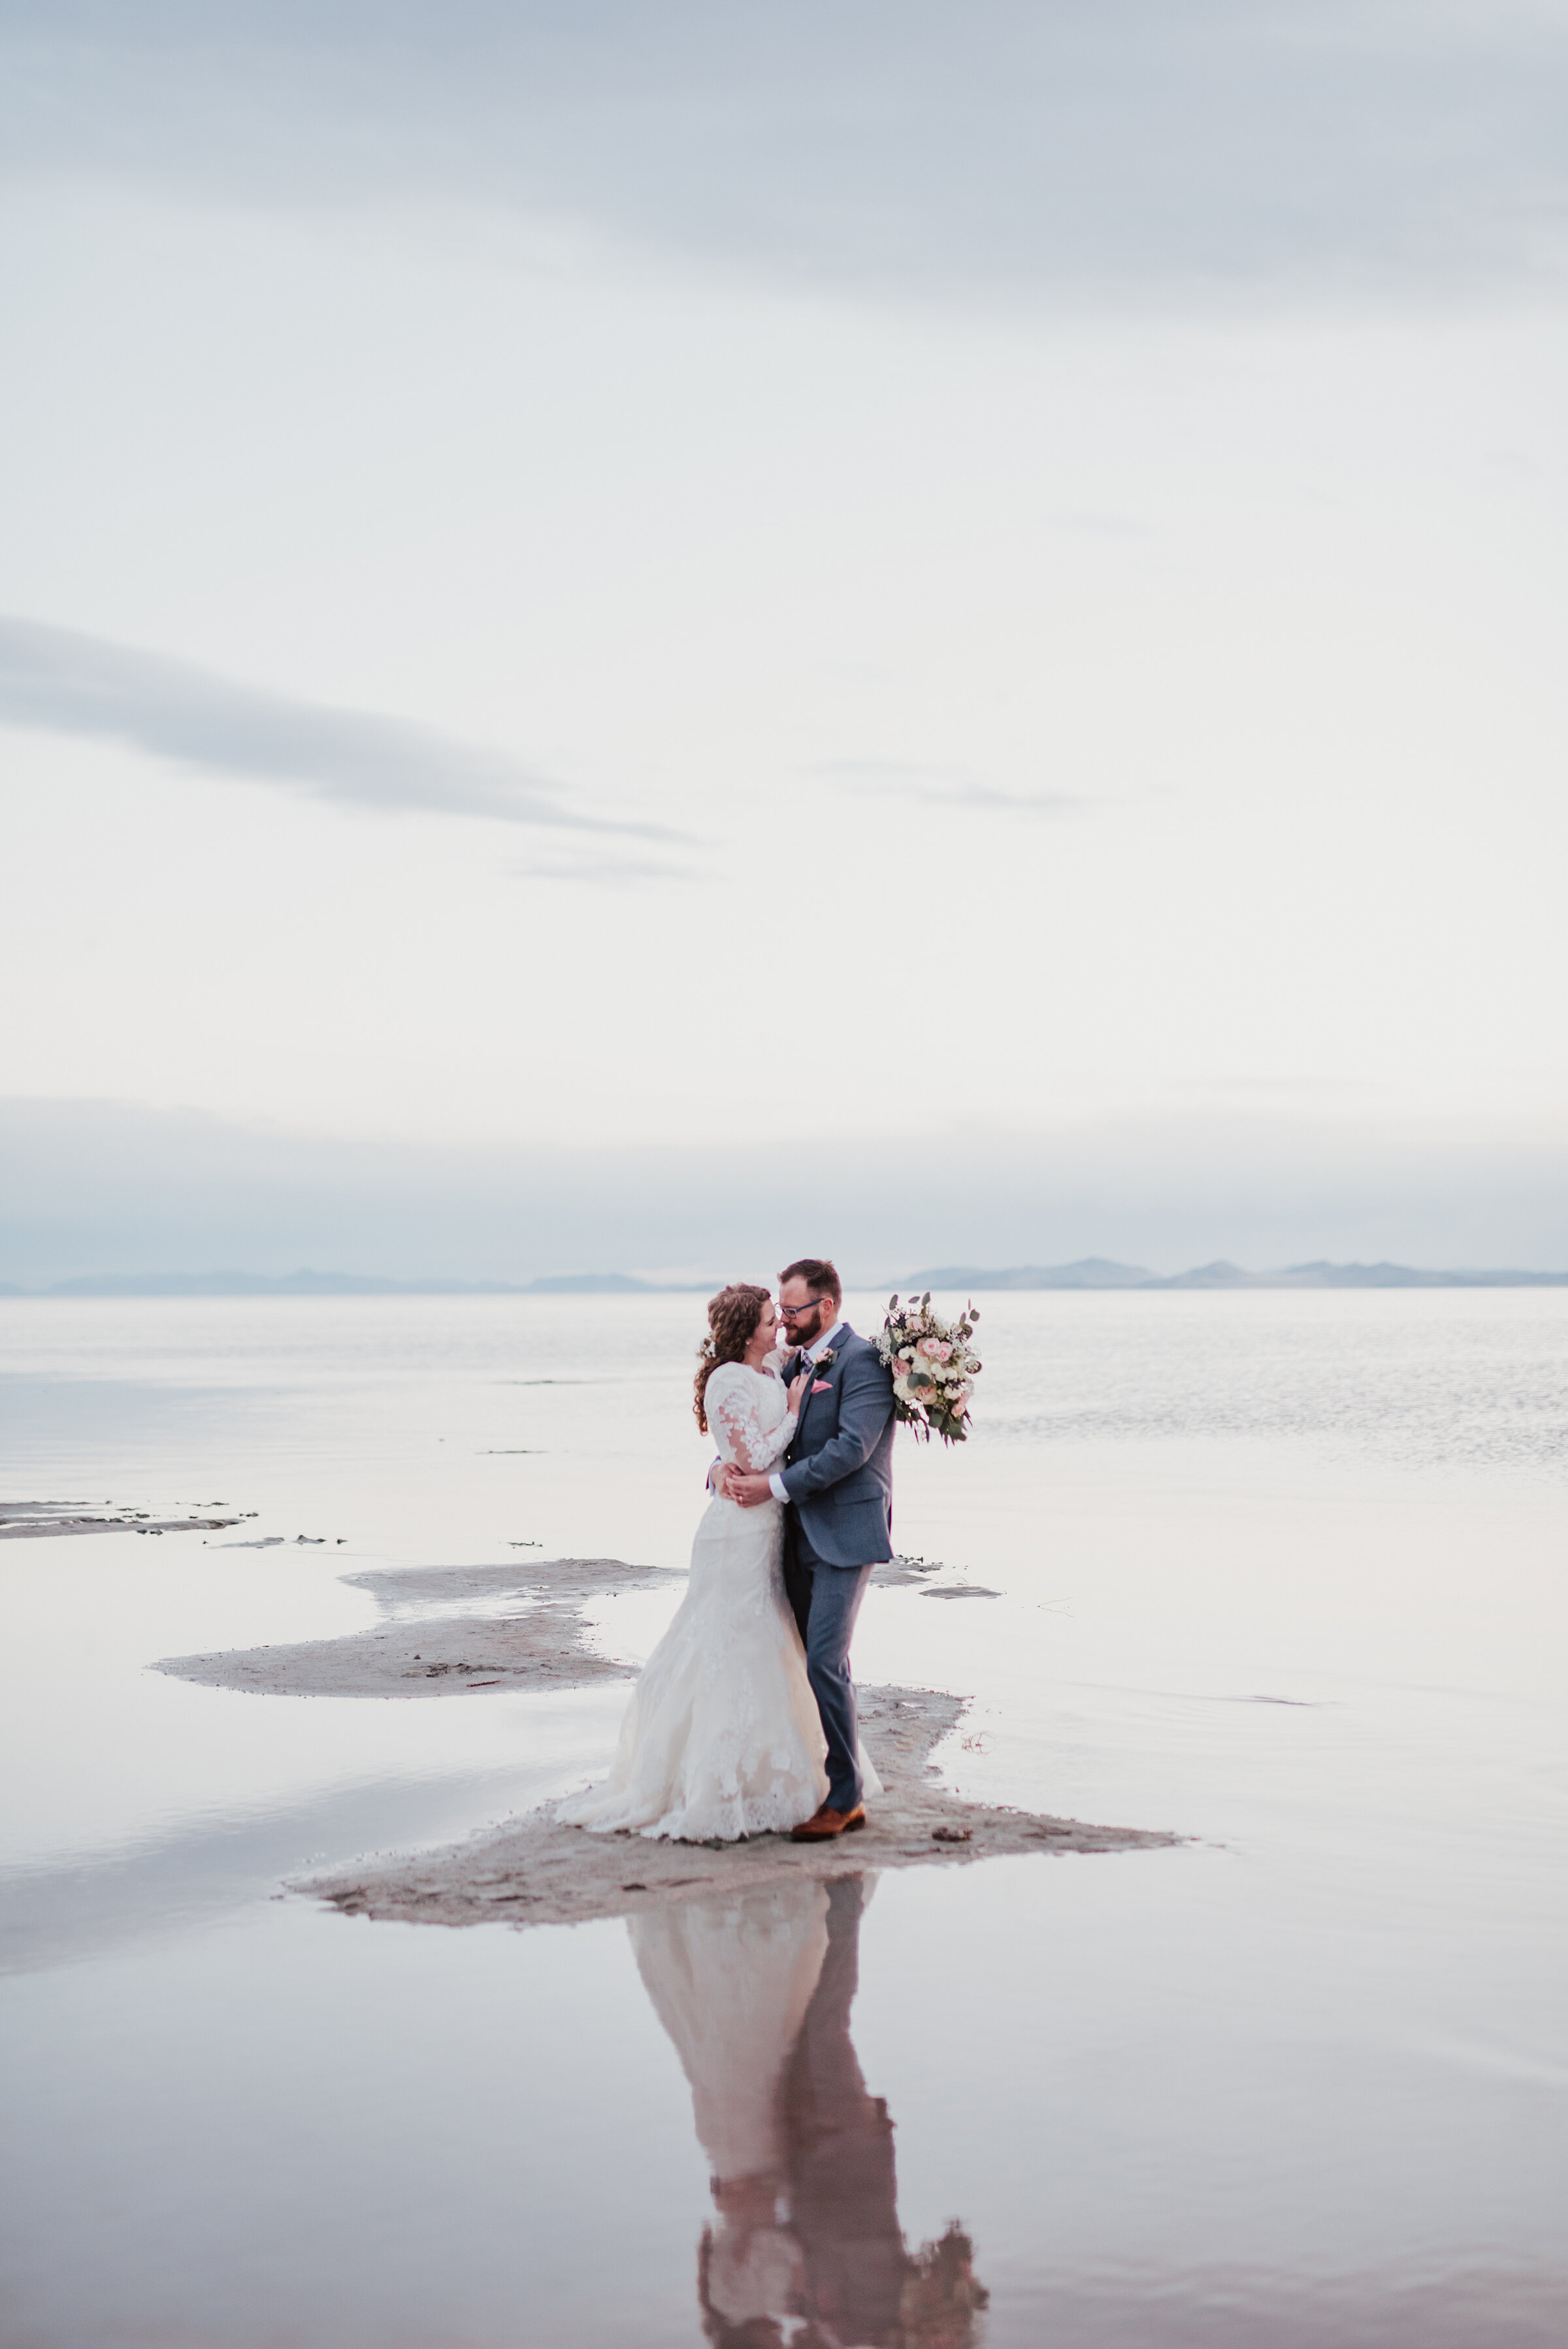  The Spiral Jetty allowed for this bride and groom to captures all of natures beauty and dimension in one photo session. Wedding formal photoshoot in Spiral Jetty Northern Utah Great Salt Lake photography wedding formals natural photo aesthetic bride and groom #spiraljetty #utahphotography #weddingformals #gettingmarried #weddingattire #utahwedding #greatoutdoorswedding #weddingformalsphotoshoot #naturalbeauty 